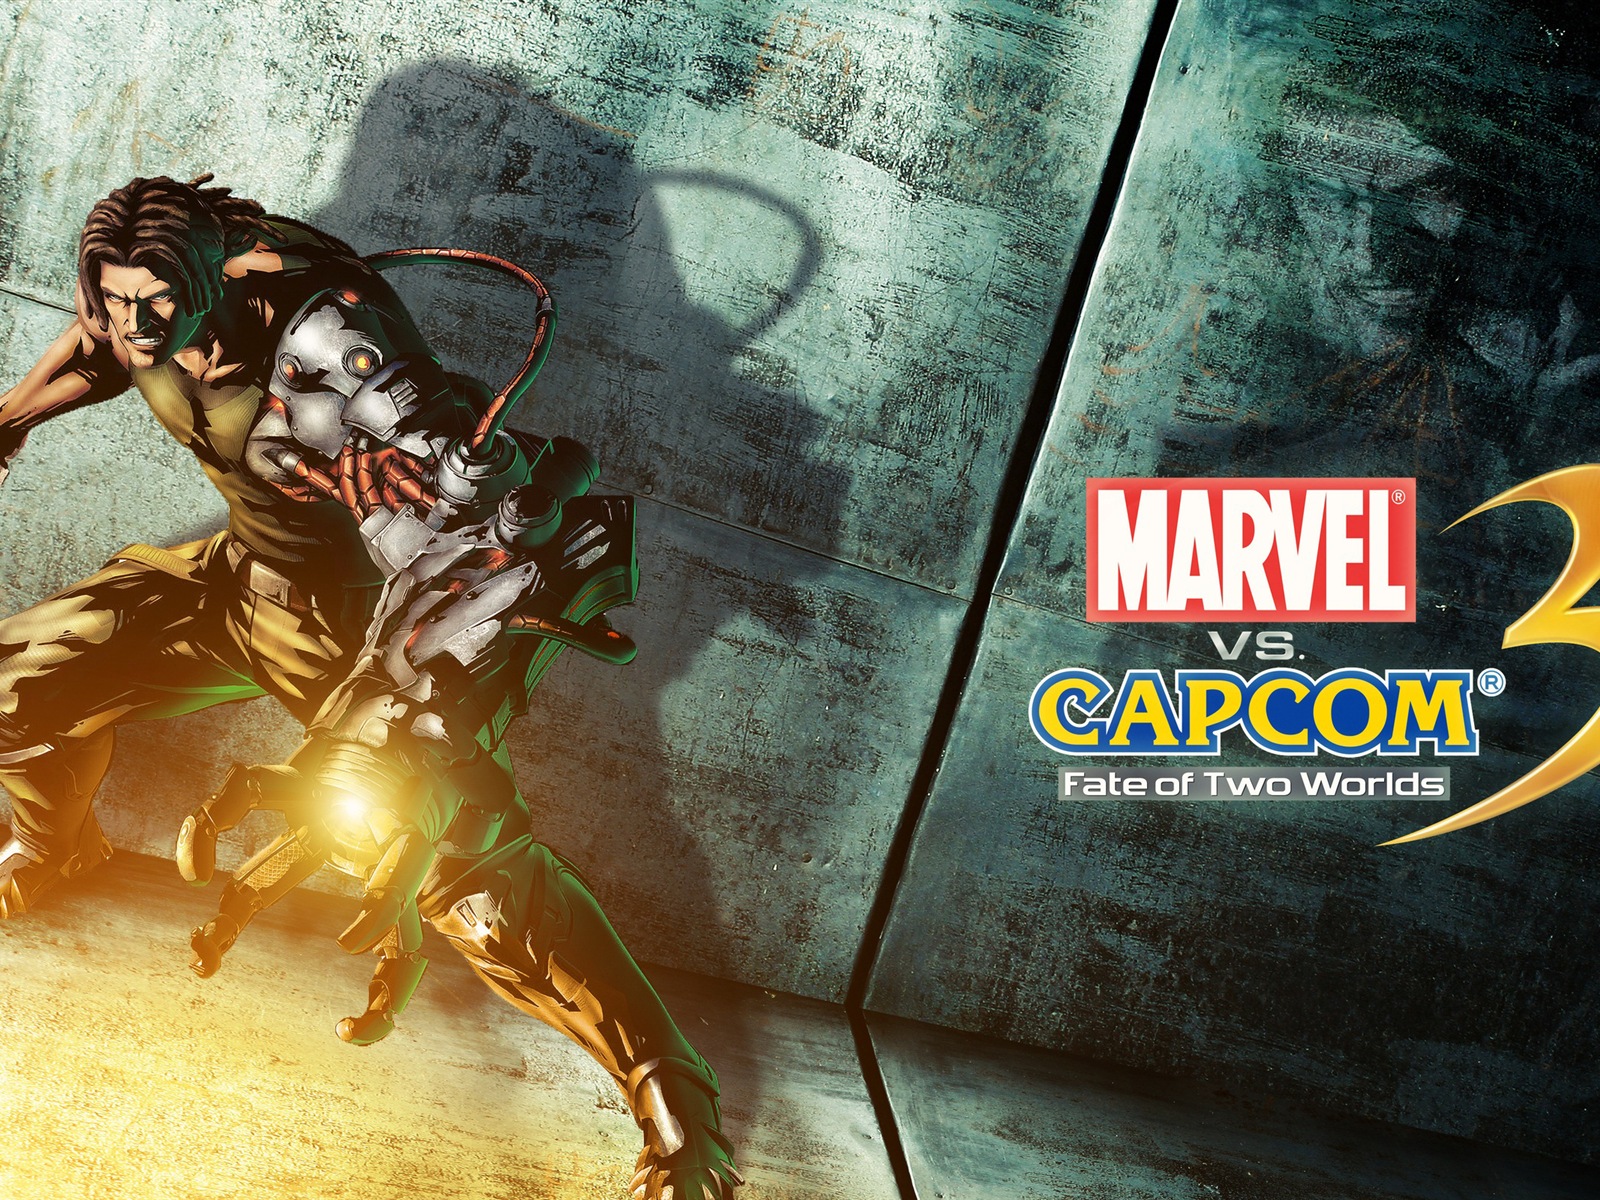 Marvel VS. Capcom 3: Fate of Two Worlds HD game wallpapers #8 - 1600x1200